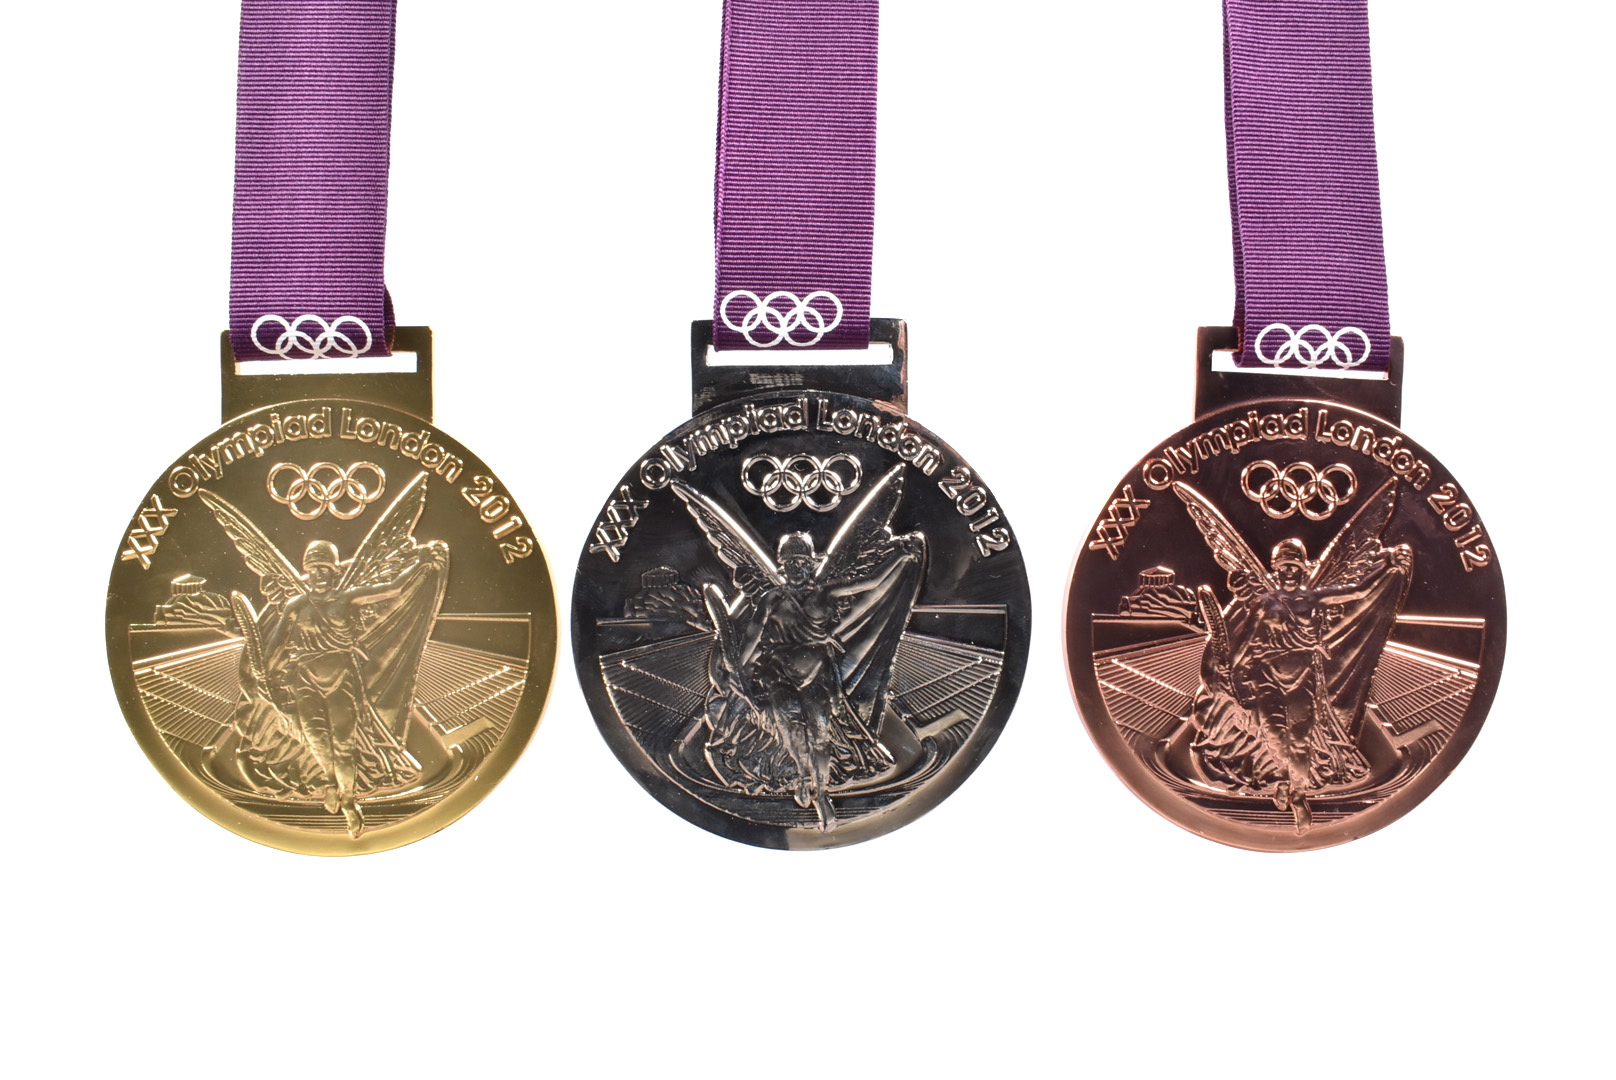 2012 London Olympic medals, possibly reproduction, designed by David Watkins, with winged Nike